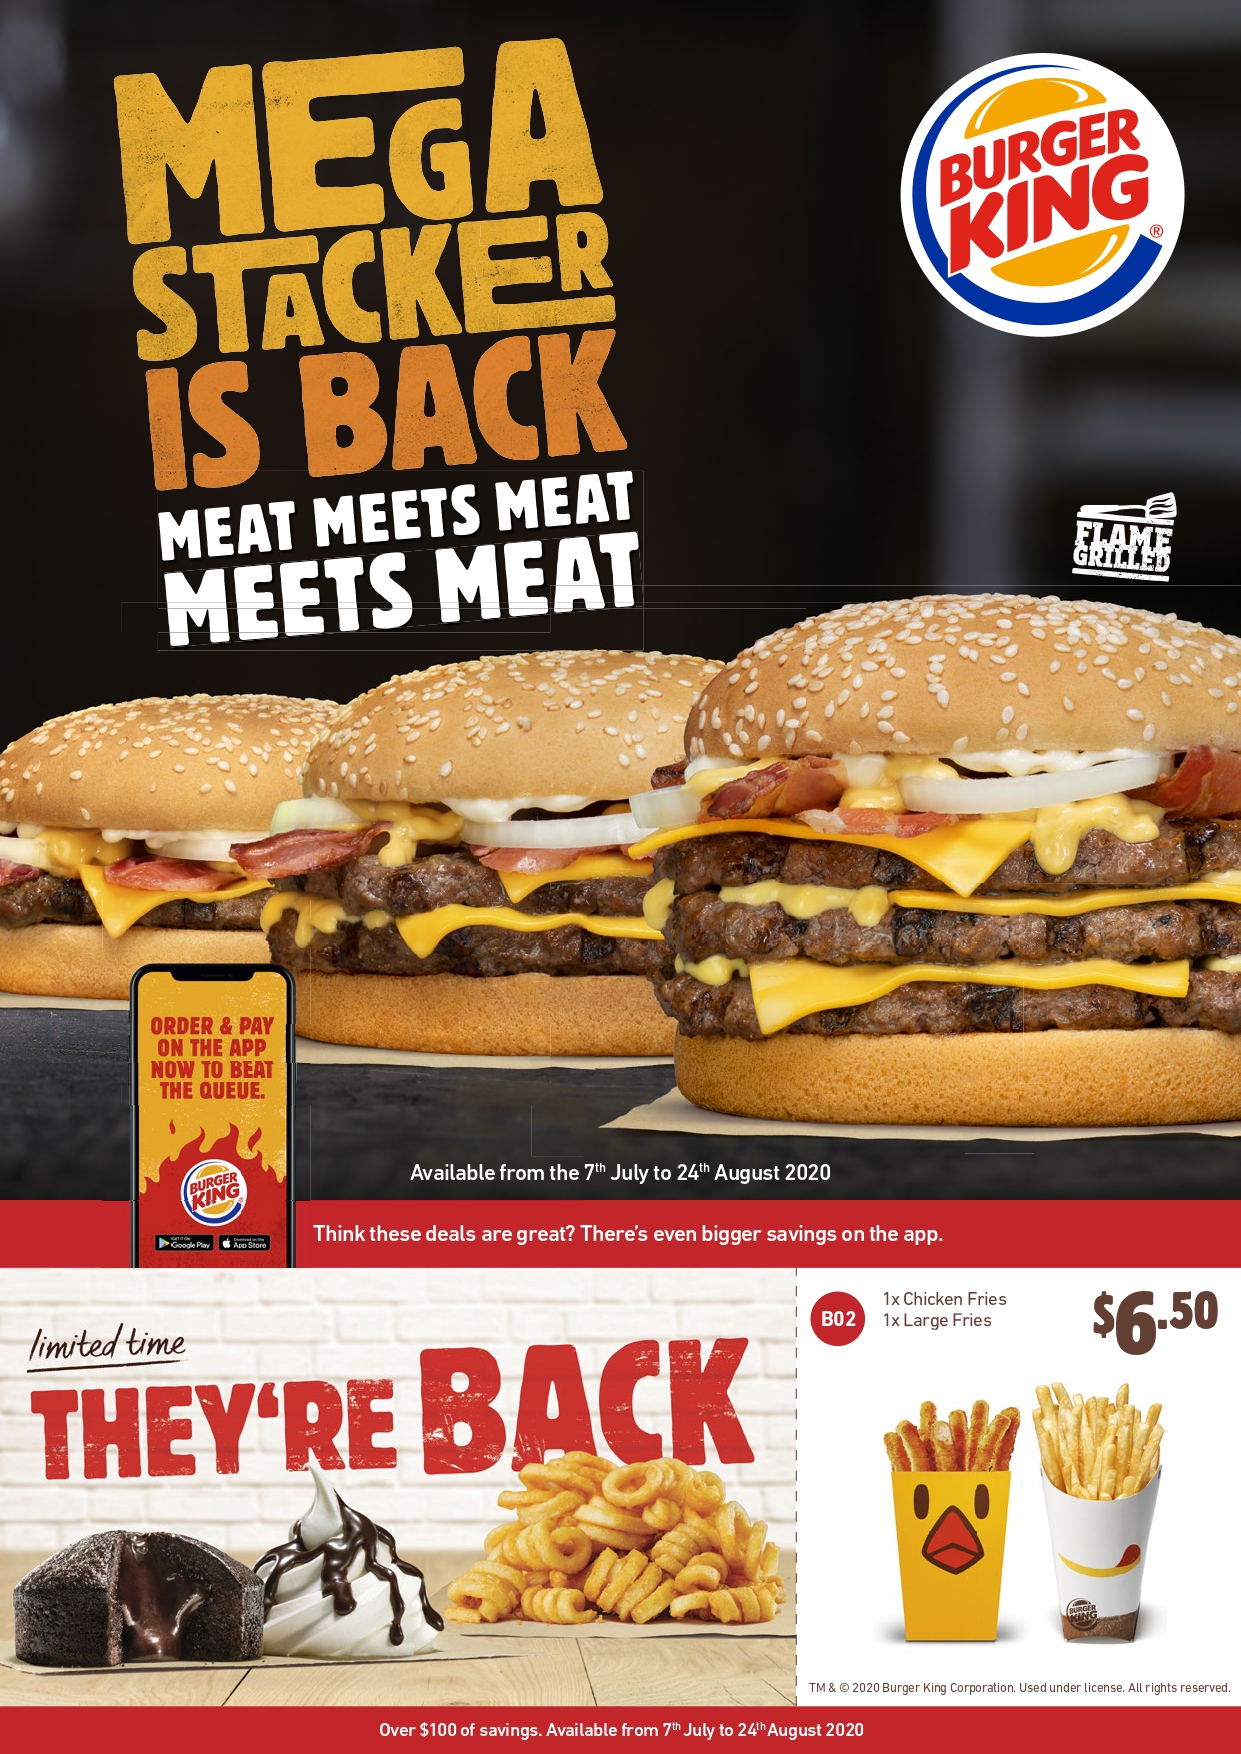 Burger King NZ Coupons & Deals - BK Coupons (August 2020) - frugal feeds nz